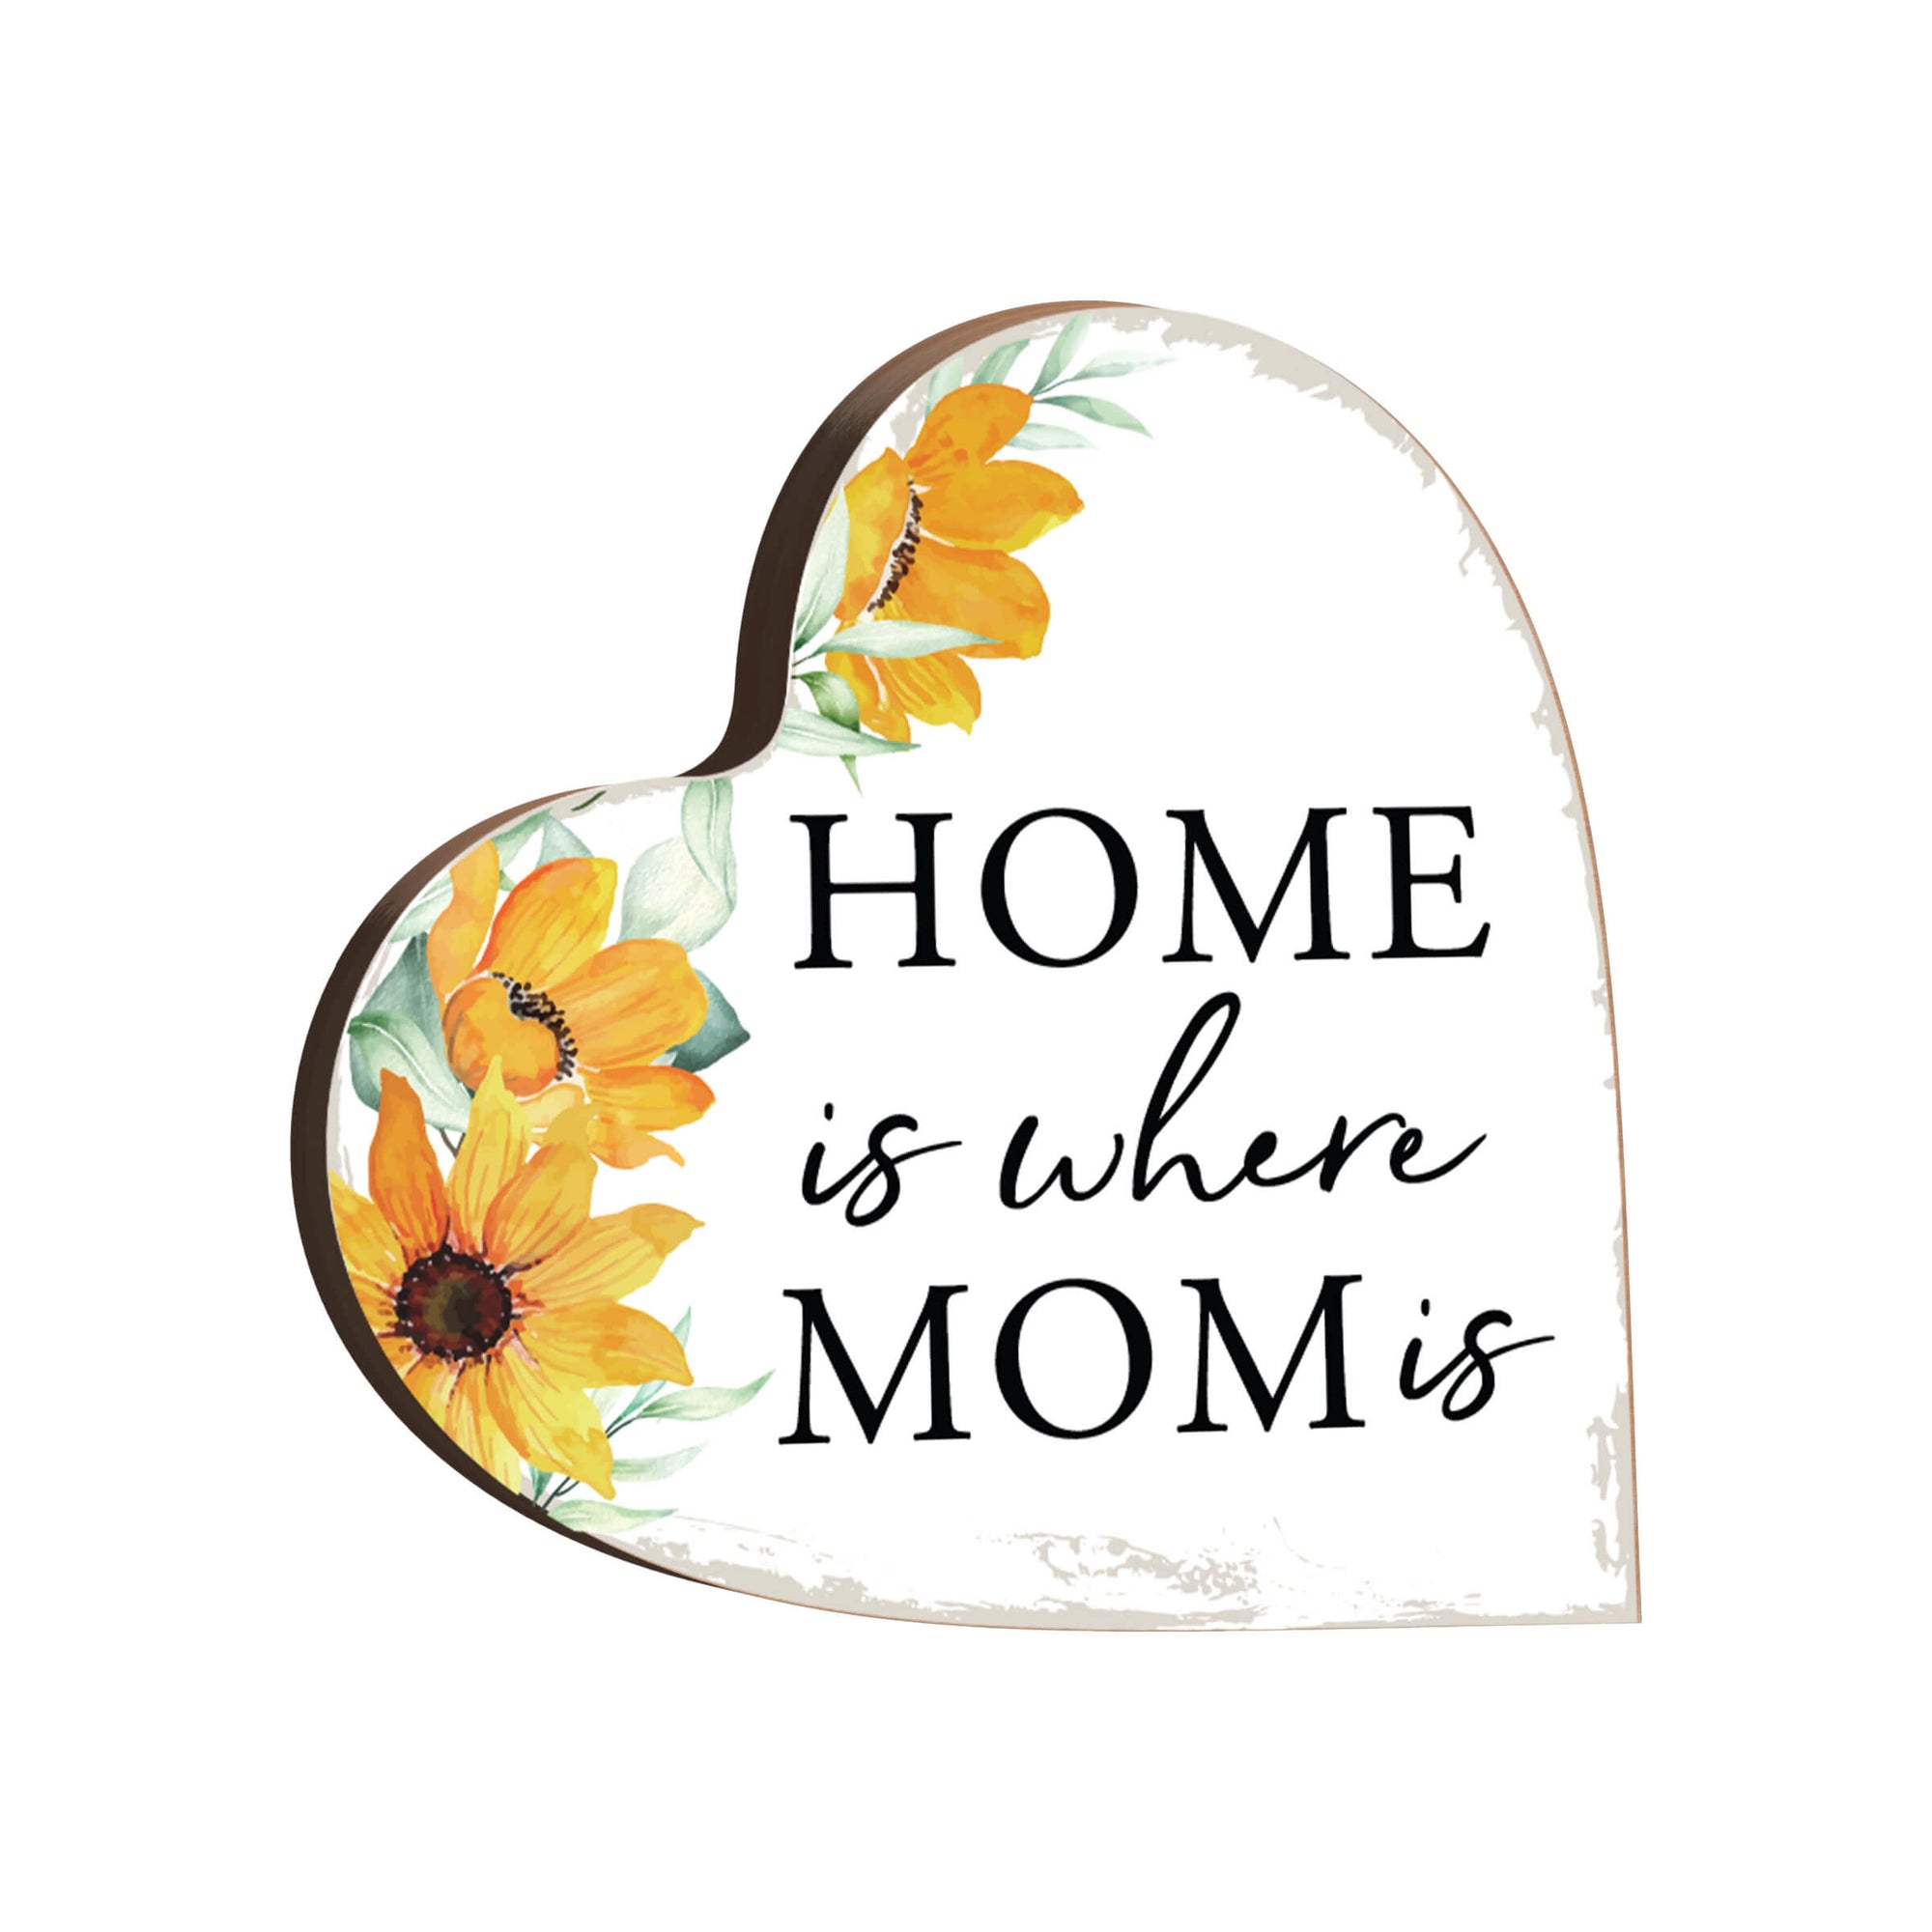 Thoughtful Wooden Shelf Decor - Unique Tabletop Signs Gift for Mom, a Heartfelt Mother's Day Surprise